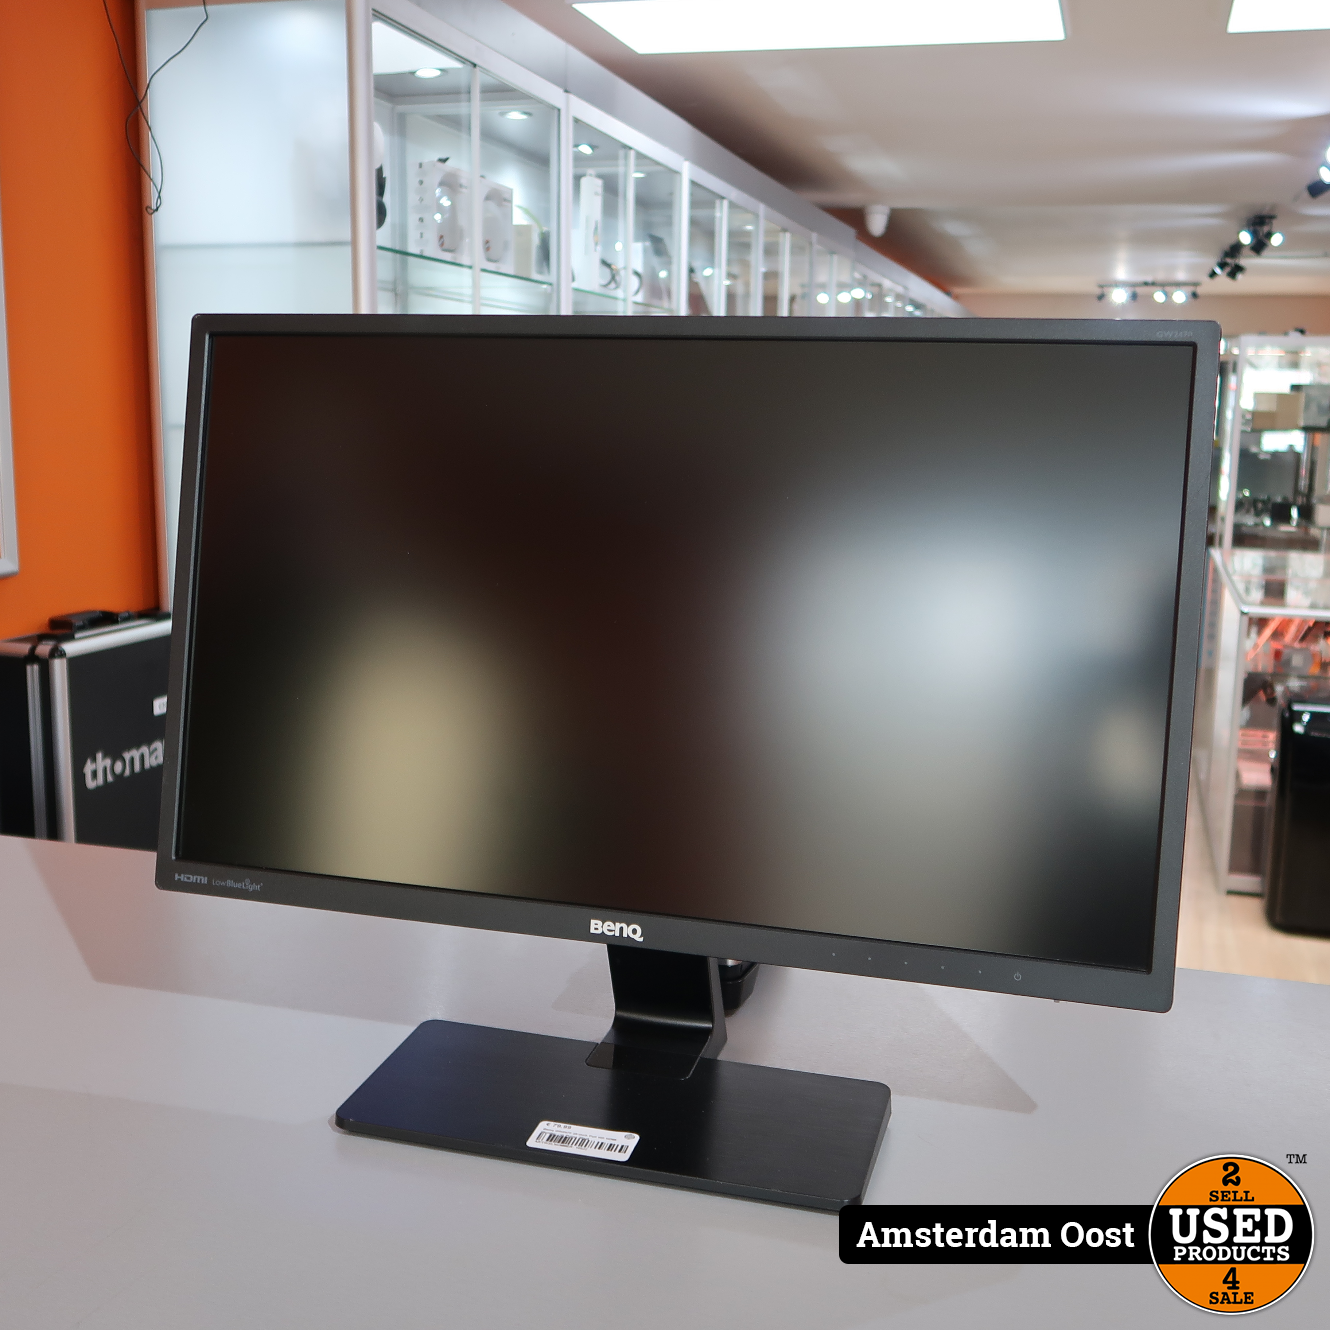 kassa Mus Demon Play Benq GW2470 24-inch Full HD HDMI Monitor | in Prima Staat - Used Products  Amsterdam Oost